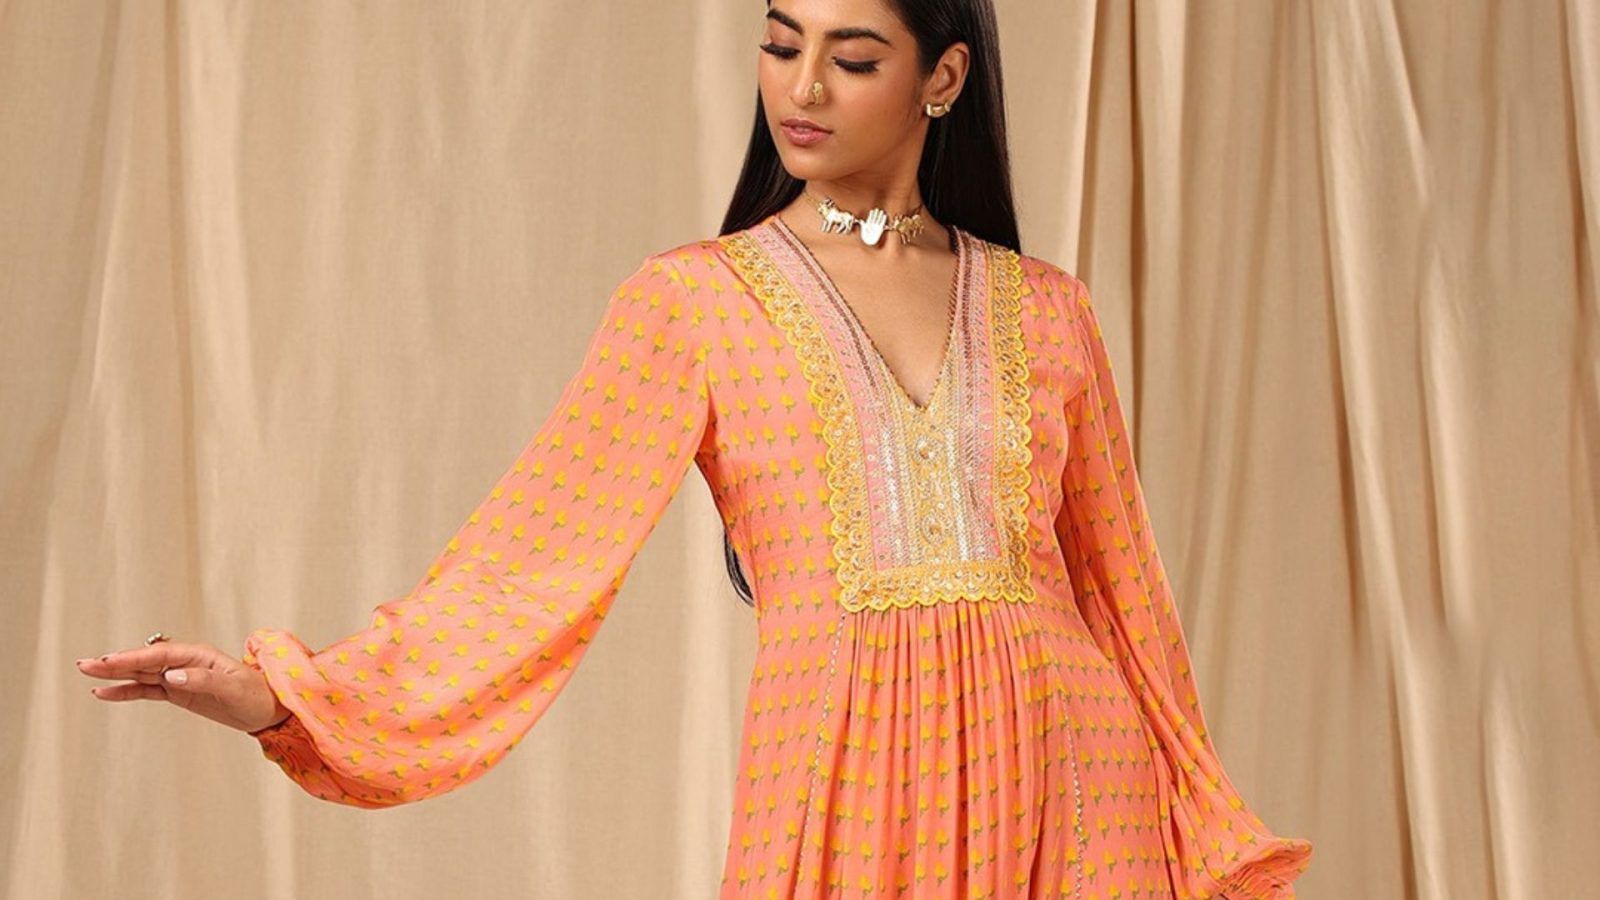 Get the best Ethnic Wear of the season at Myntra Big Fashion Festival: Here  are the offers to look out for - Times of India